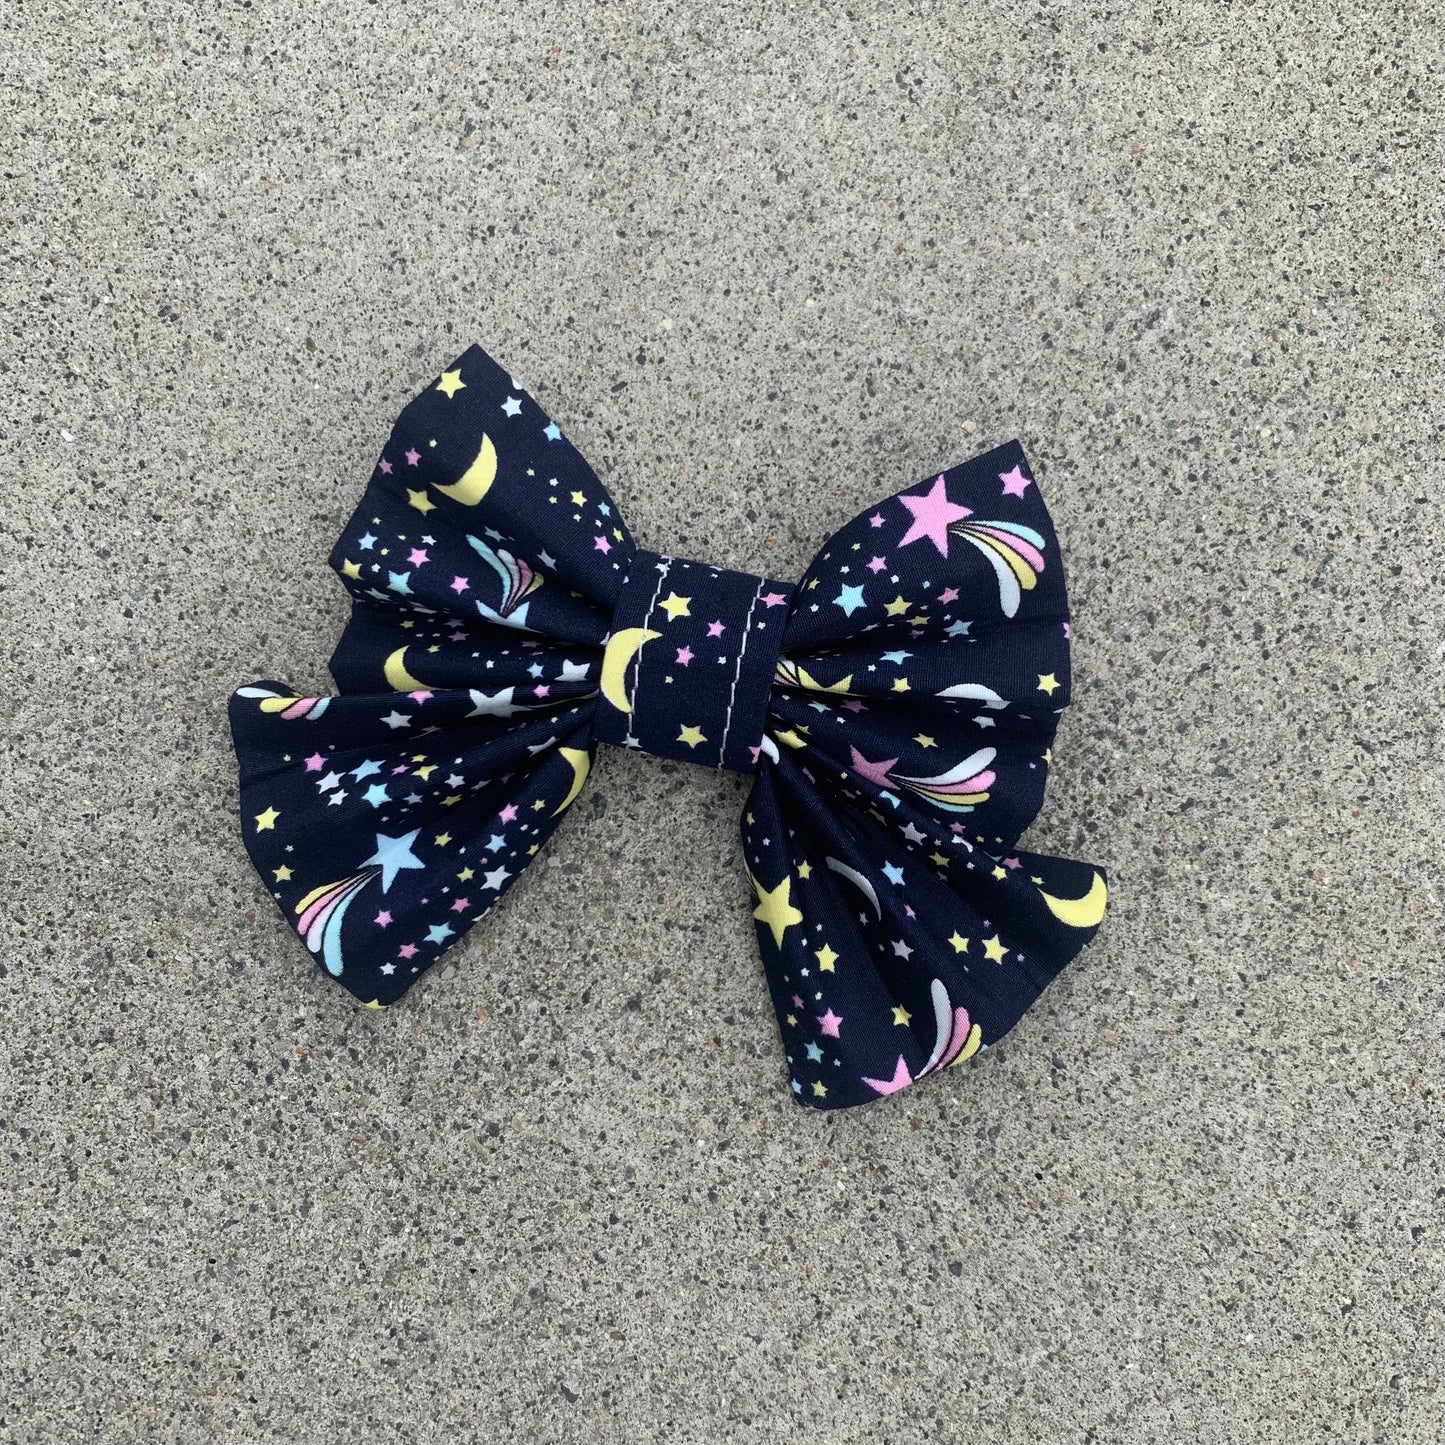 STAR - Blue/Navy Shooting Star and Moon Bow Tie or Hair Bow to fit Collar